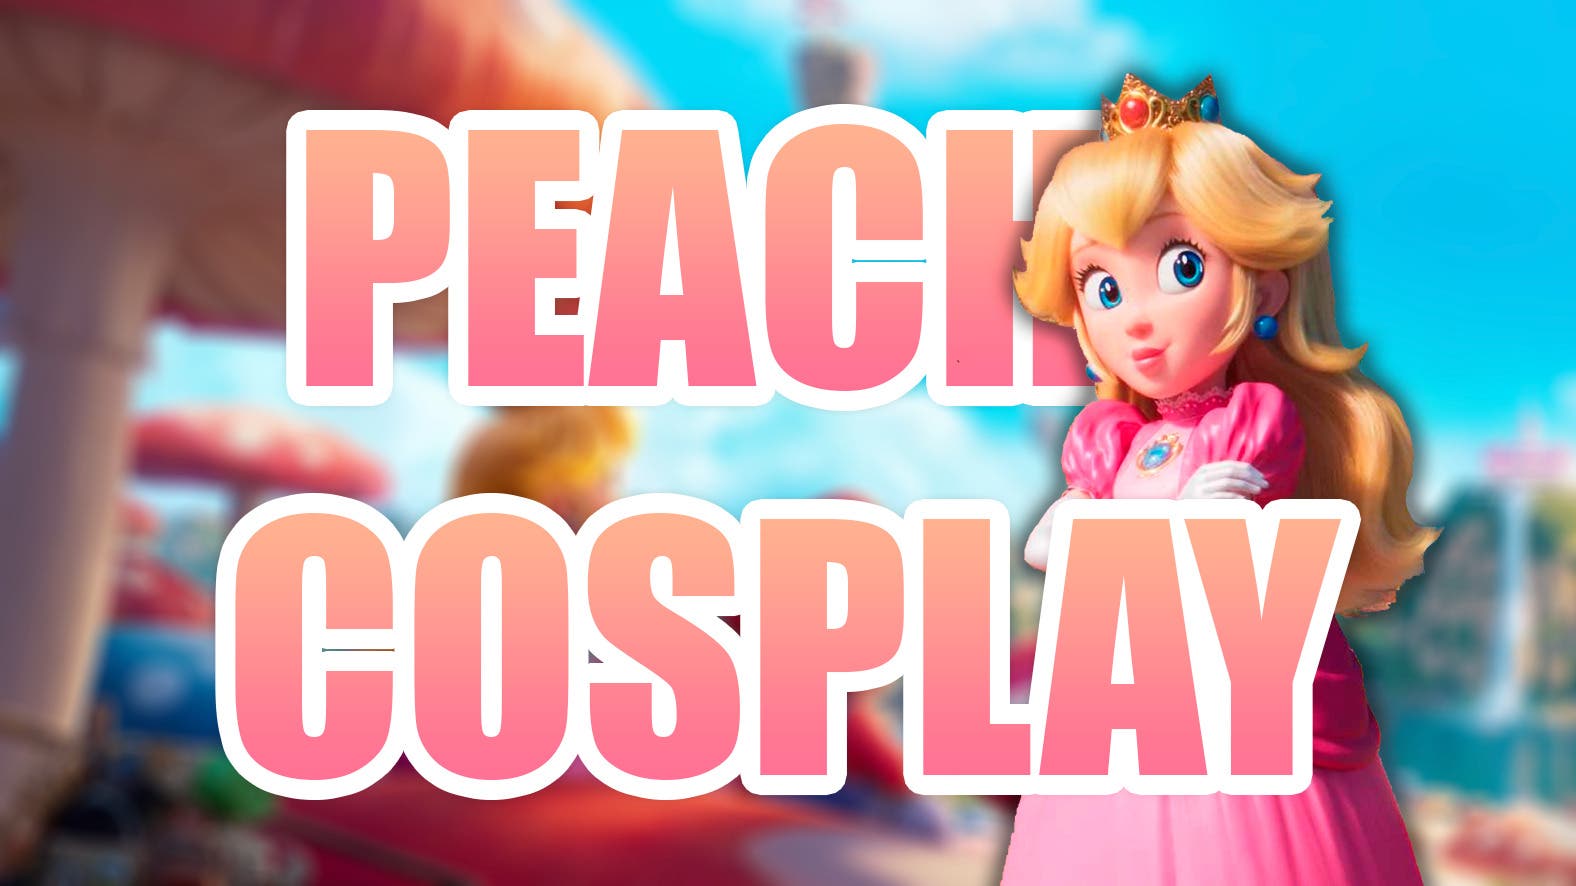 The incredible cosplay that recreates Peach from Super Mario Bros: The Movie